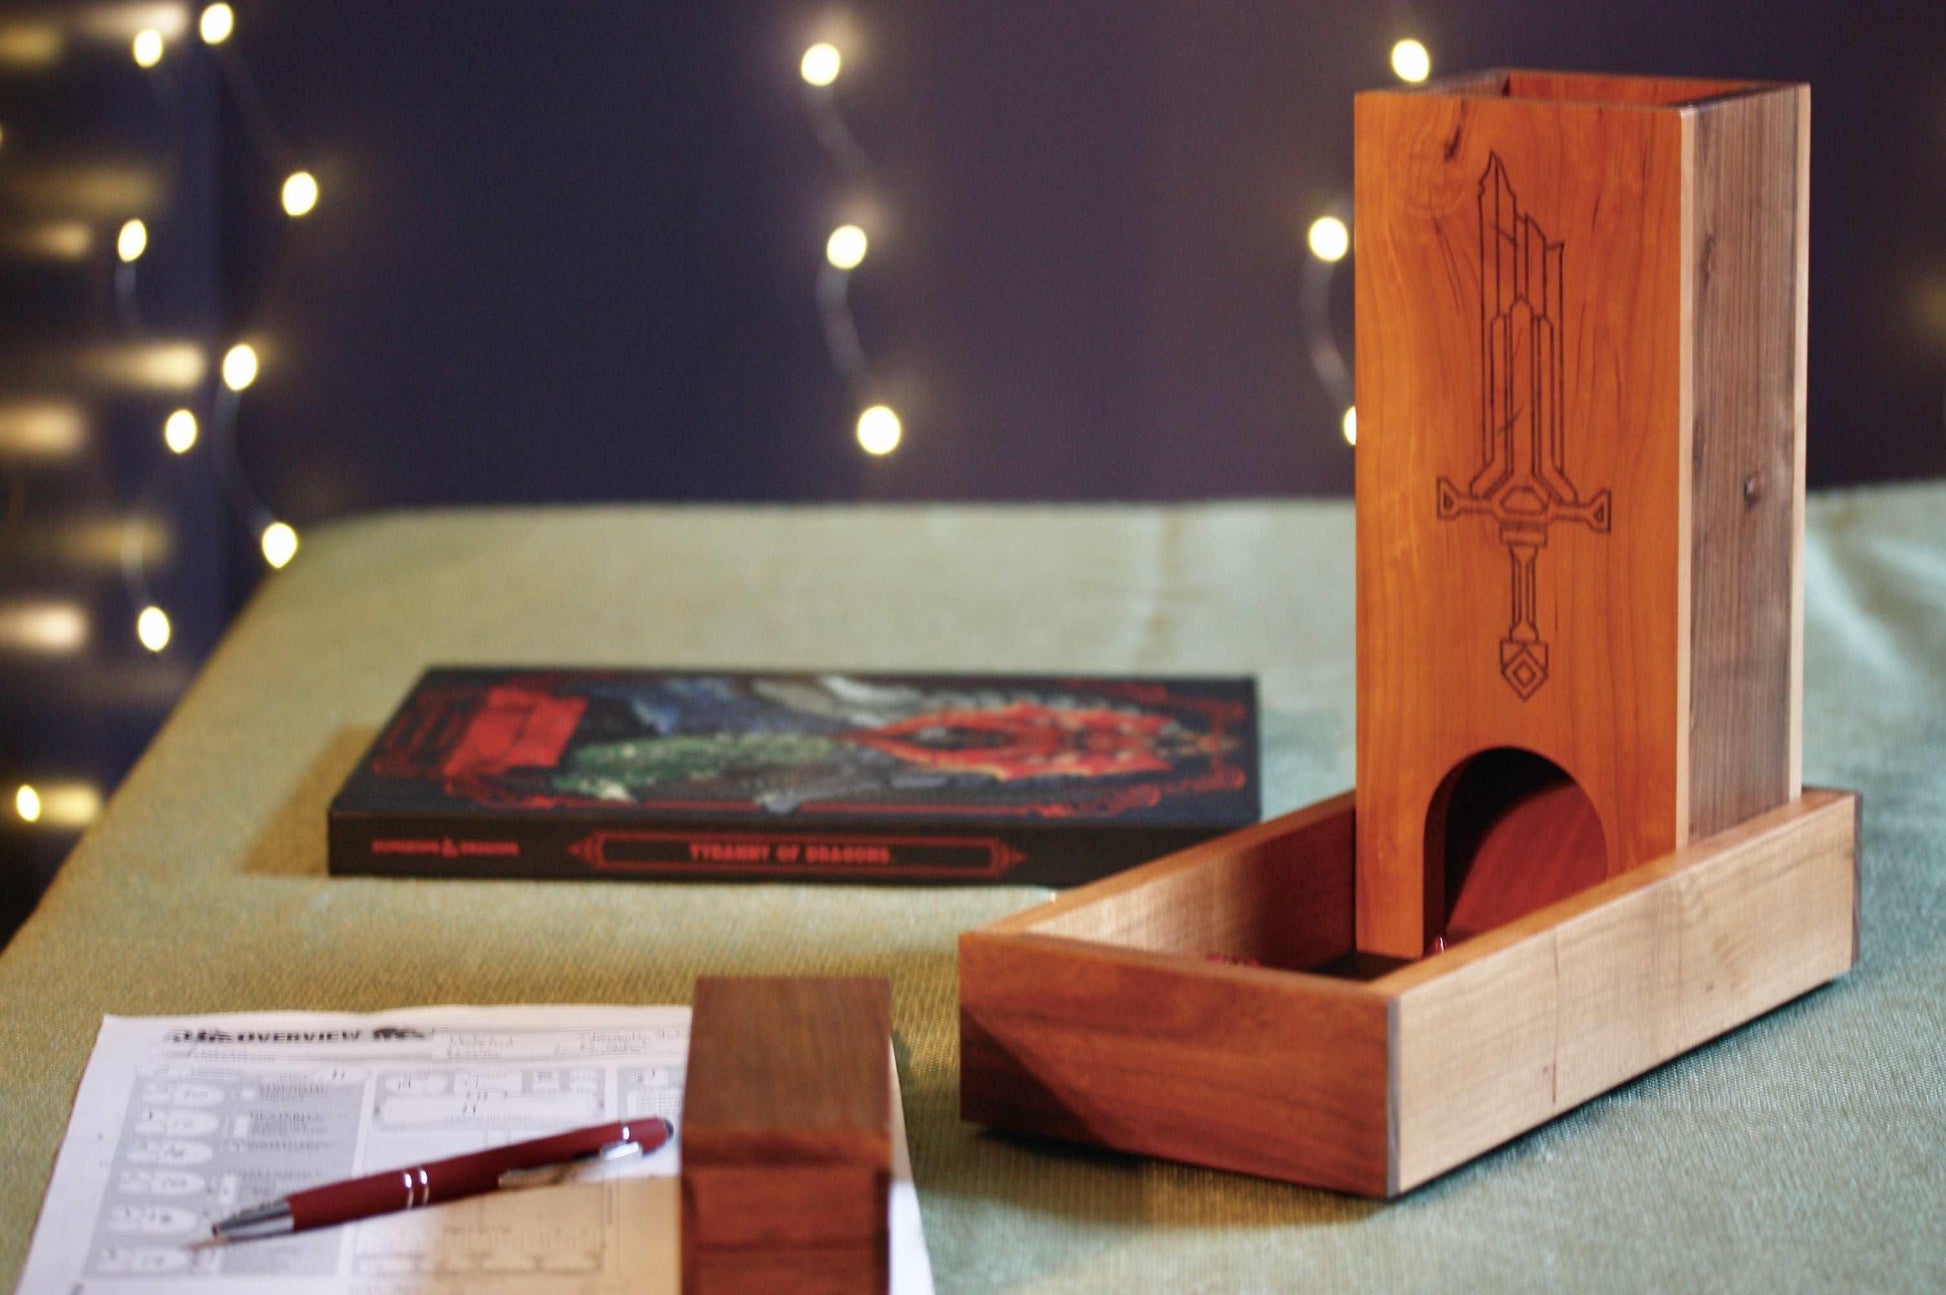 Cherry and Walnut Wooden Dice Tower With the Sword Design - Dragon Armor Games